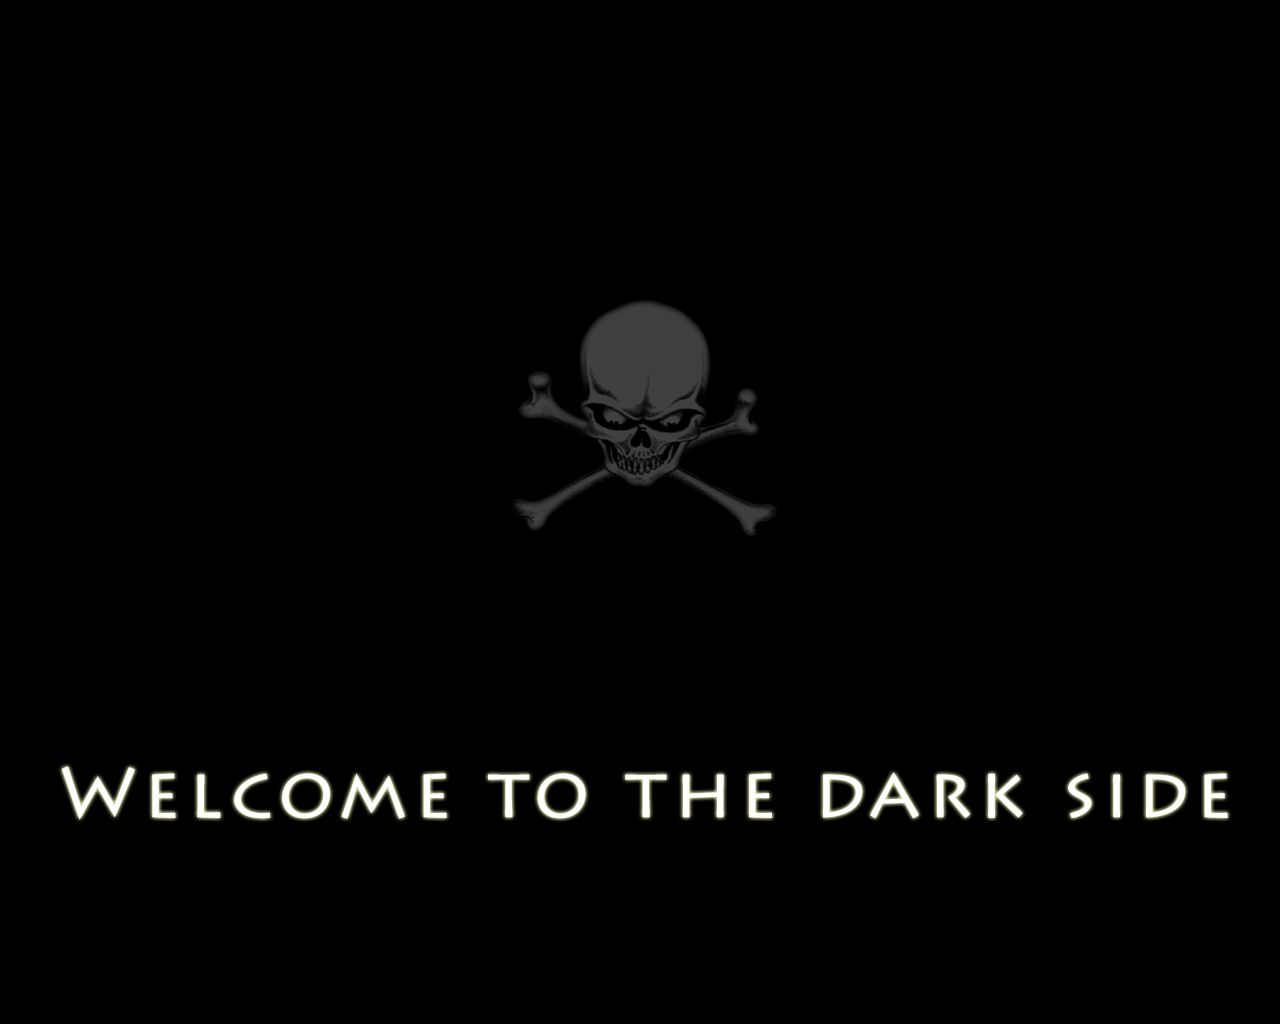 welcome_to_the_dark_side_by_lopas1.jpg